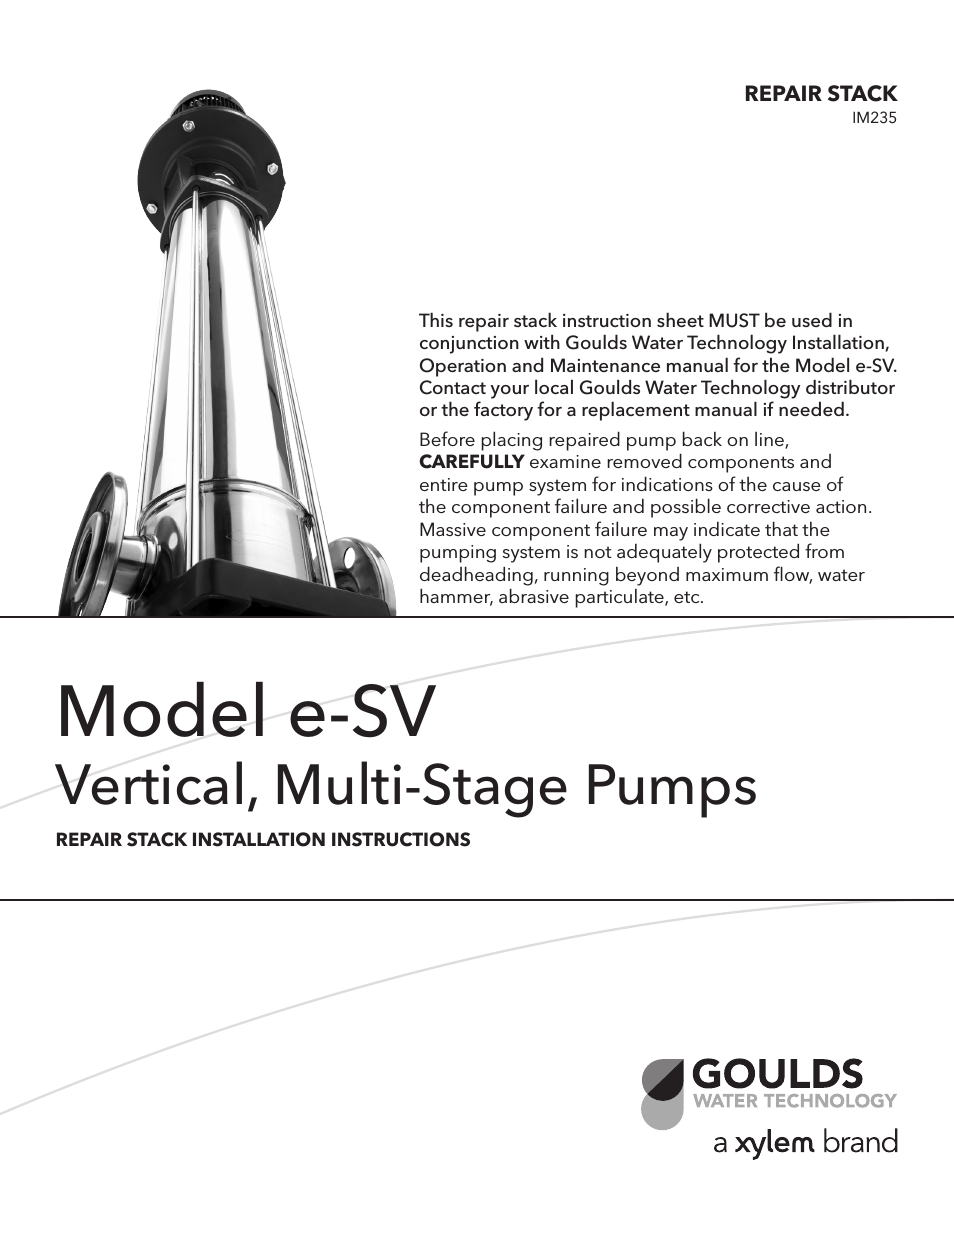 Goulds Water Technology Model e-SV, Vertical Multi-Stage Pumps Repair Stack